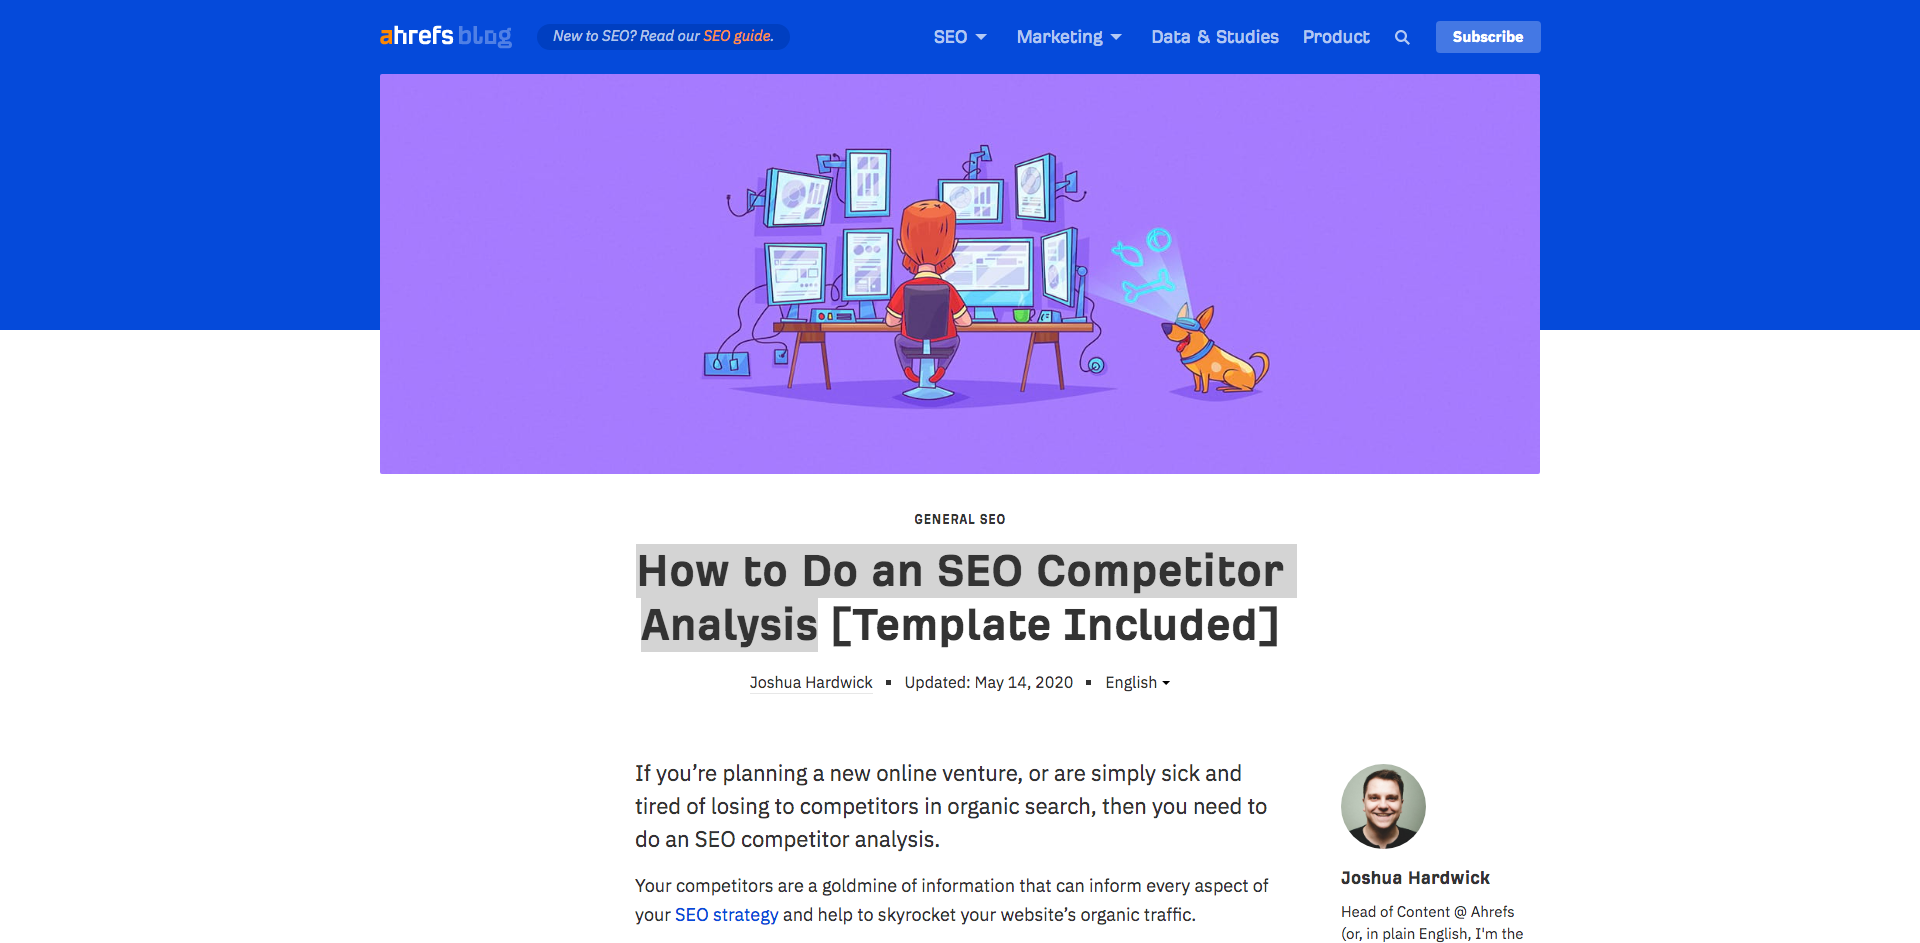 How to Do an SEO Competitor Analysis blog